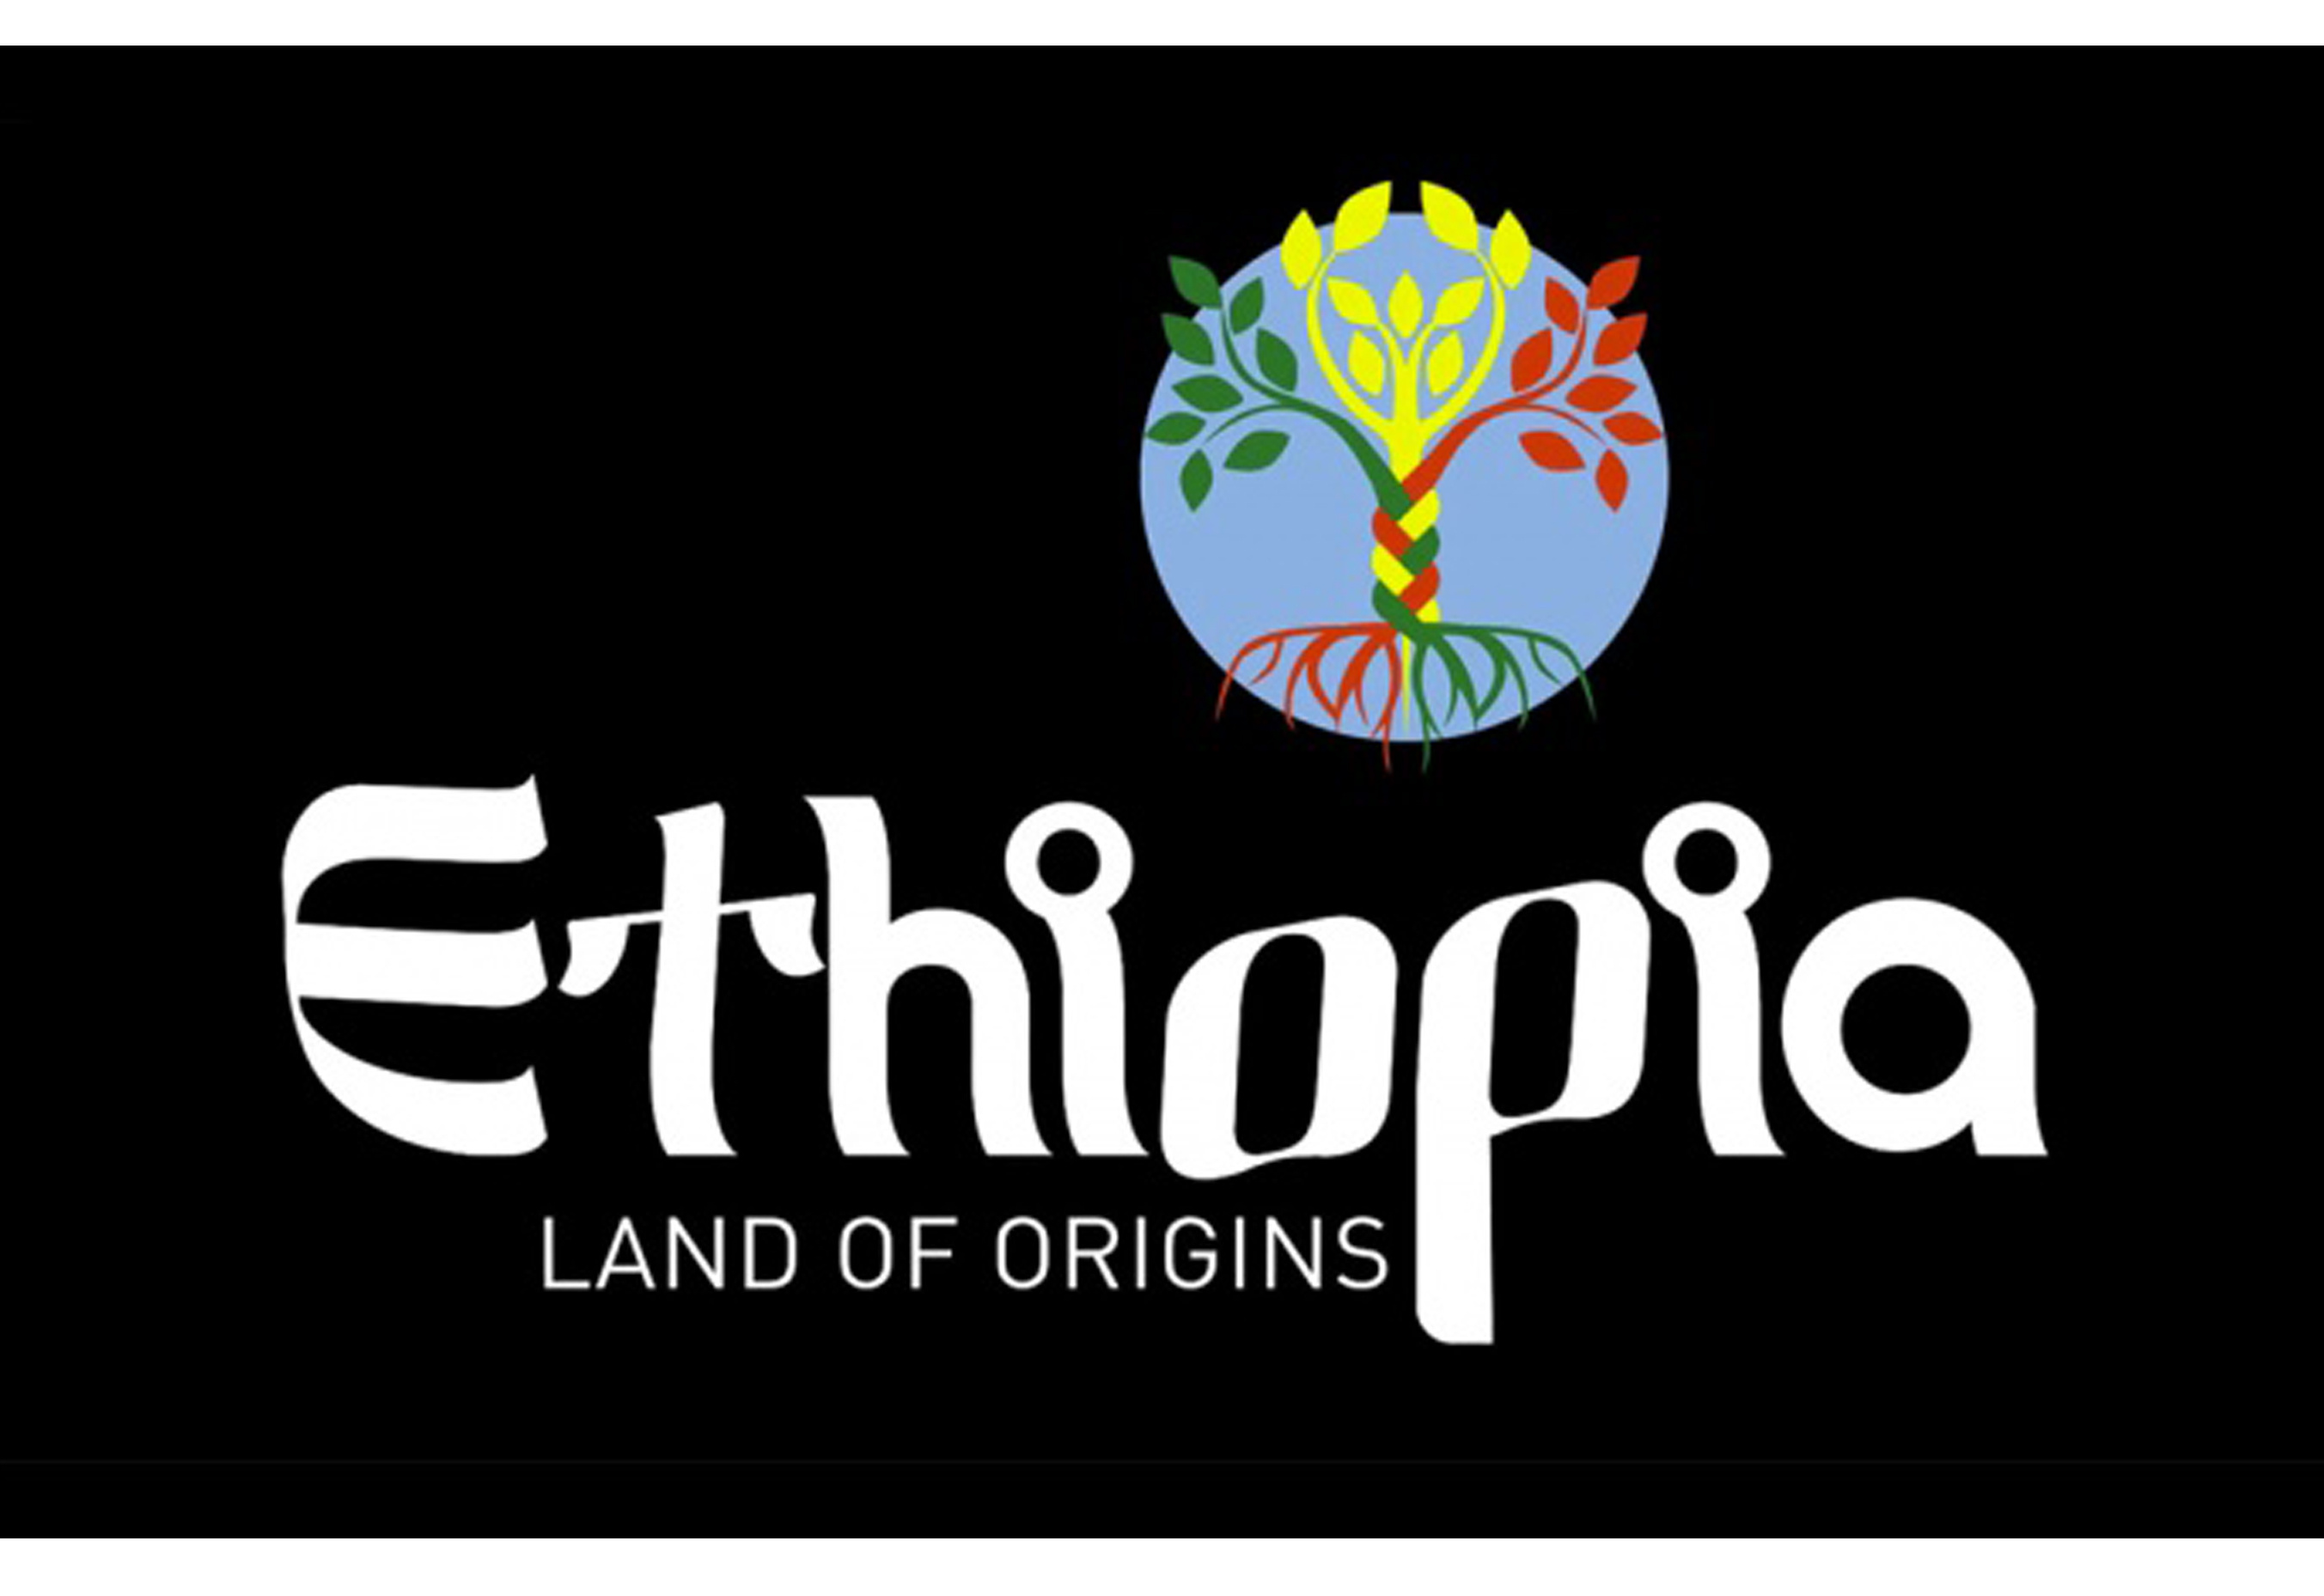 Ethiopia invites you to discover why it is the origin of so much